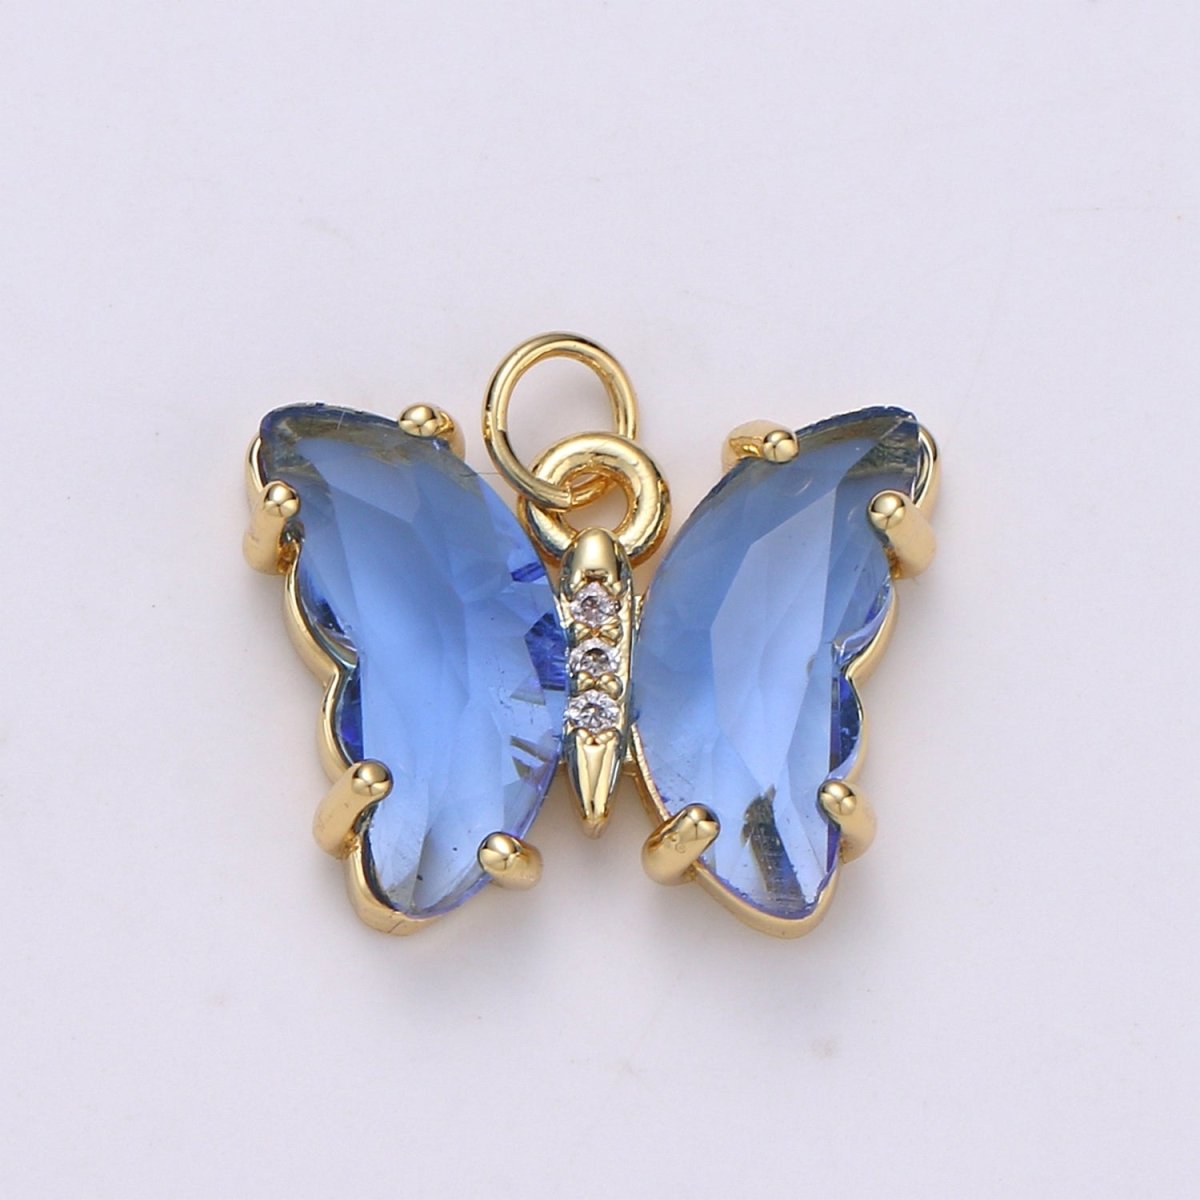 Clear Mariposa Butterfly Charm Acrylic Butterfly Charm Glass Pendant for Necklace Earring Bracelet Component in 24k Gold Filled Tarnish Free D-820 - DLUXCA